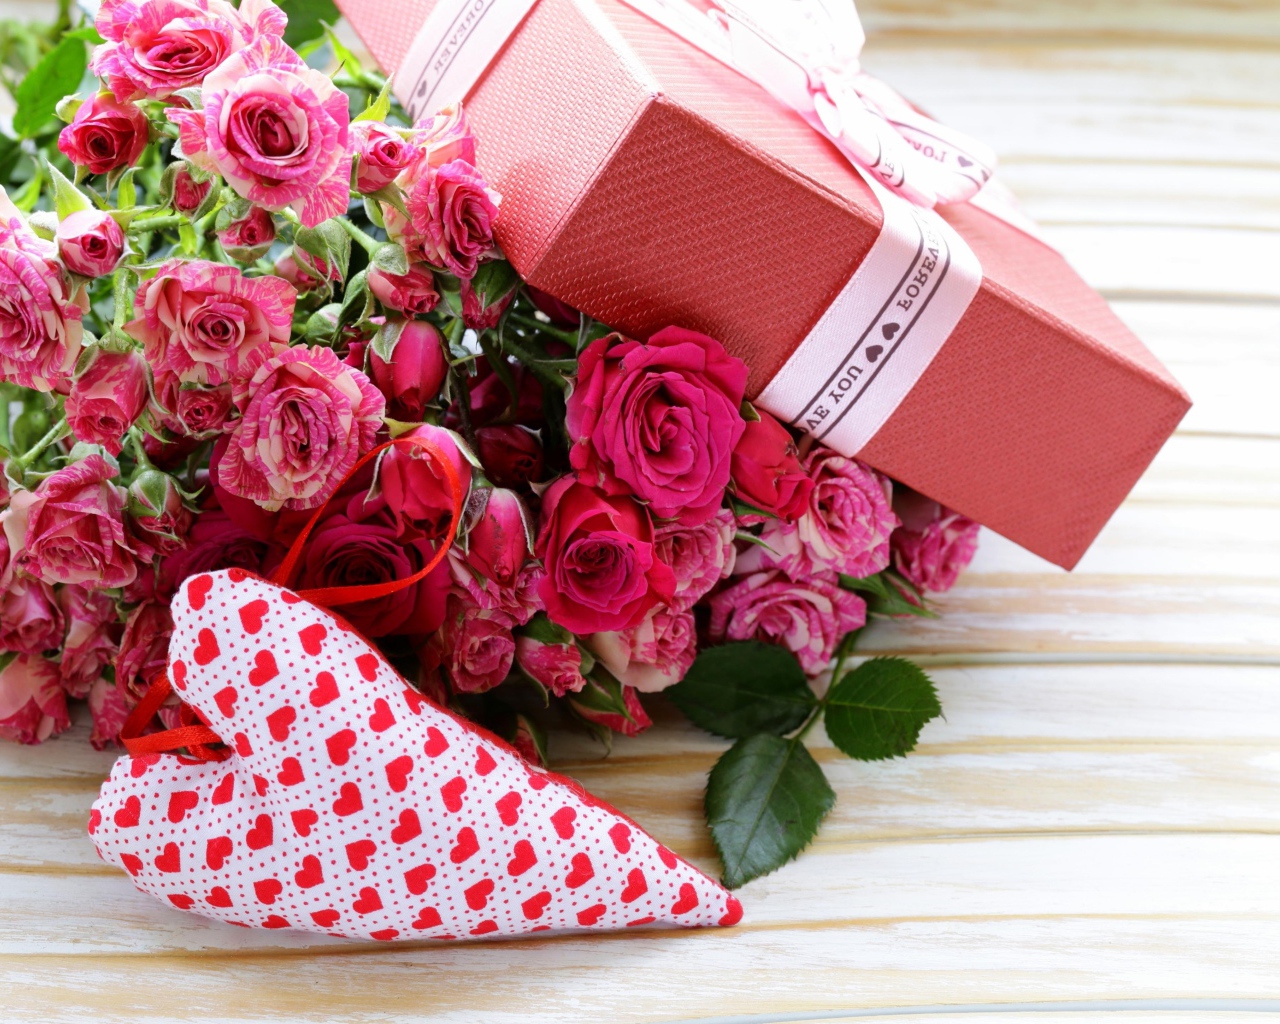 Bouquet of pink roses with a gift and a heart on the table